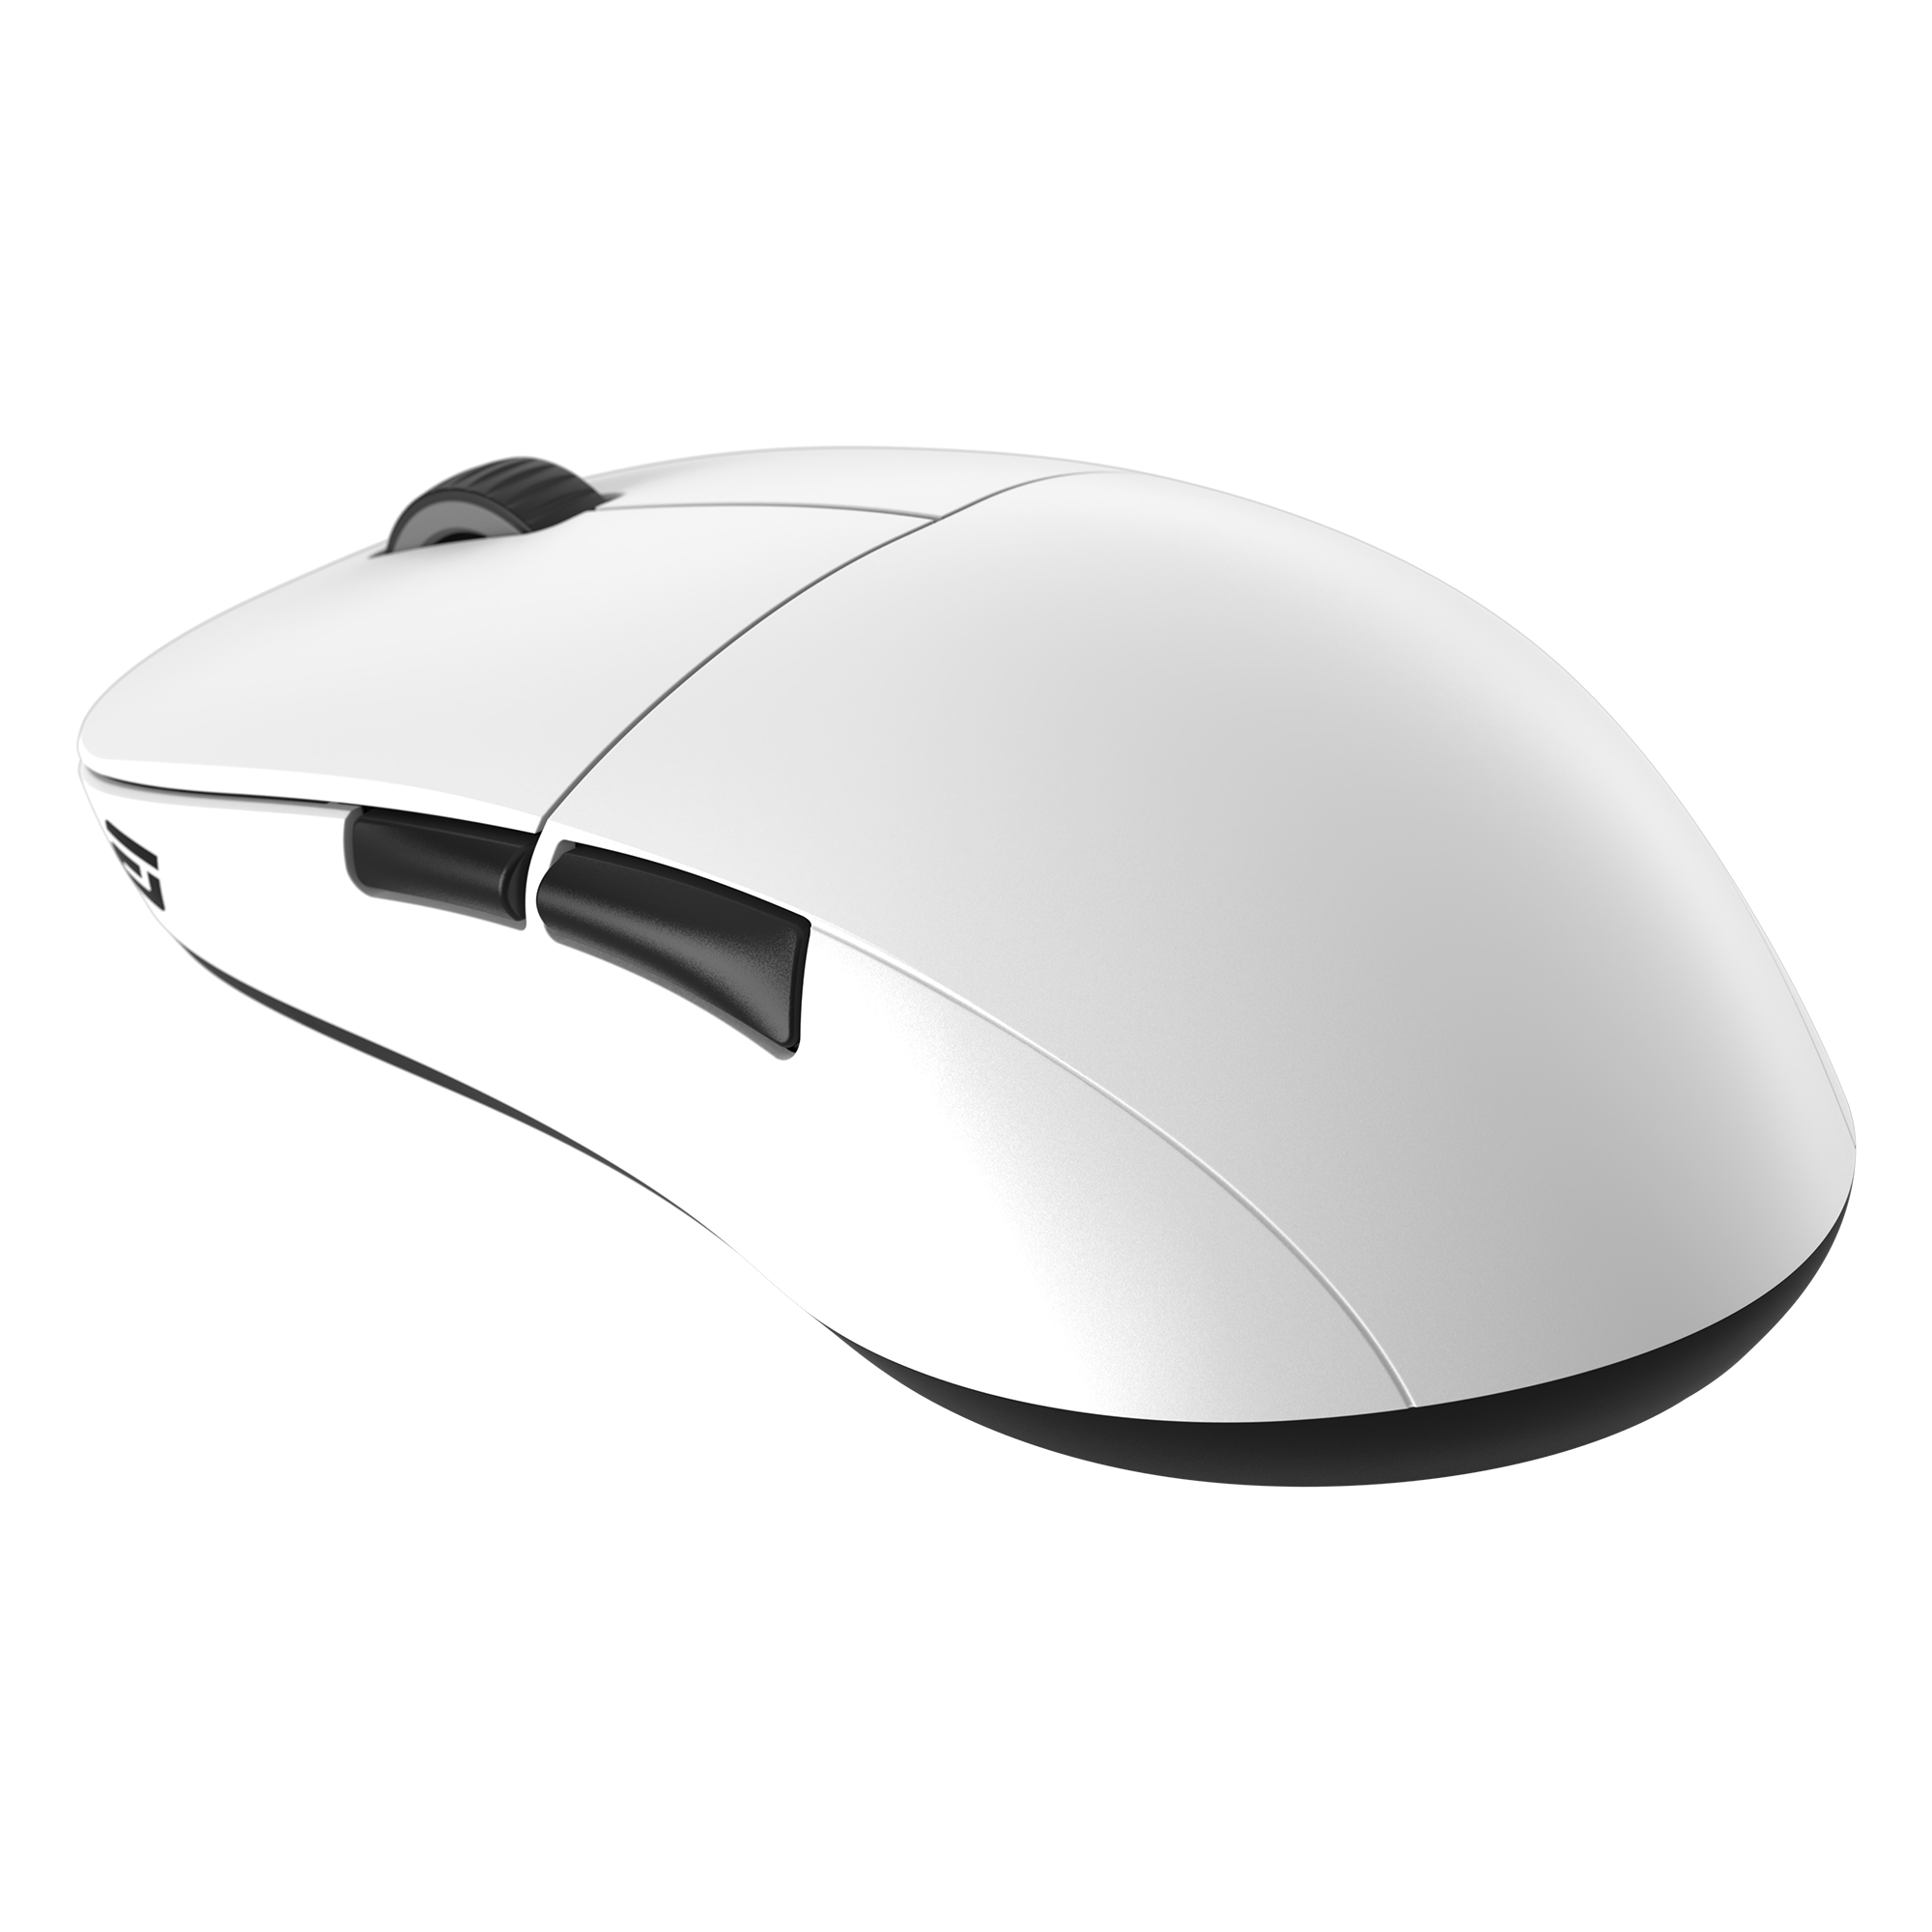 Endgame Gear XM2WE Wireless Optical Lightweight Gaming Mouse - White (EGG-XM2WE-WHT)